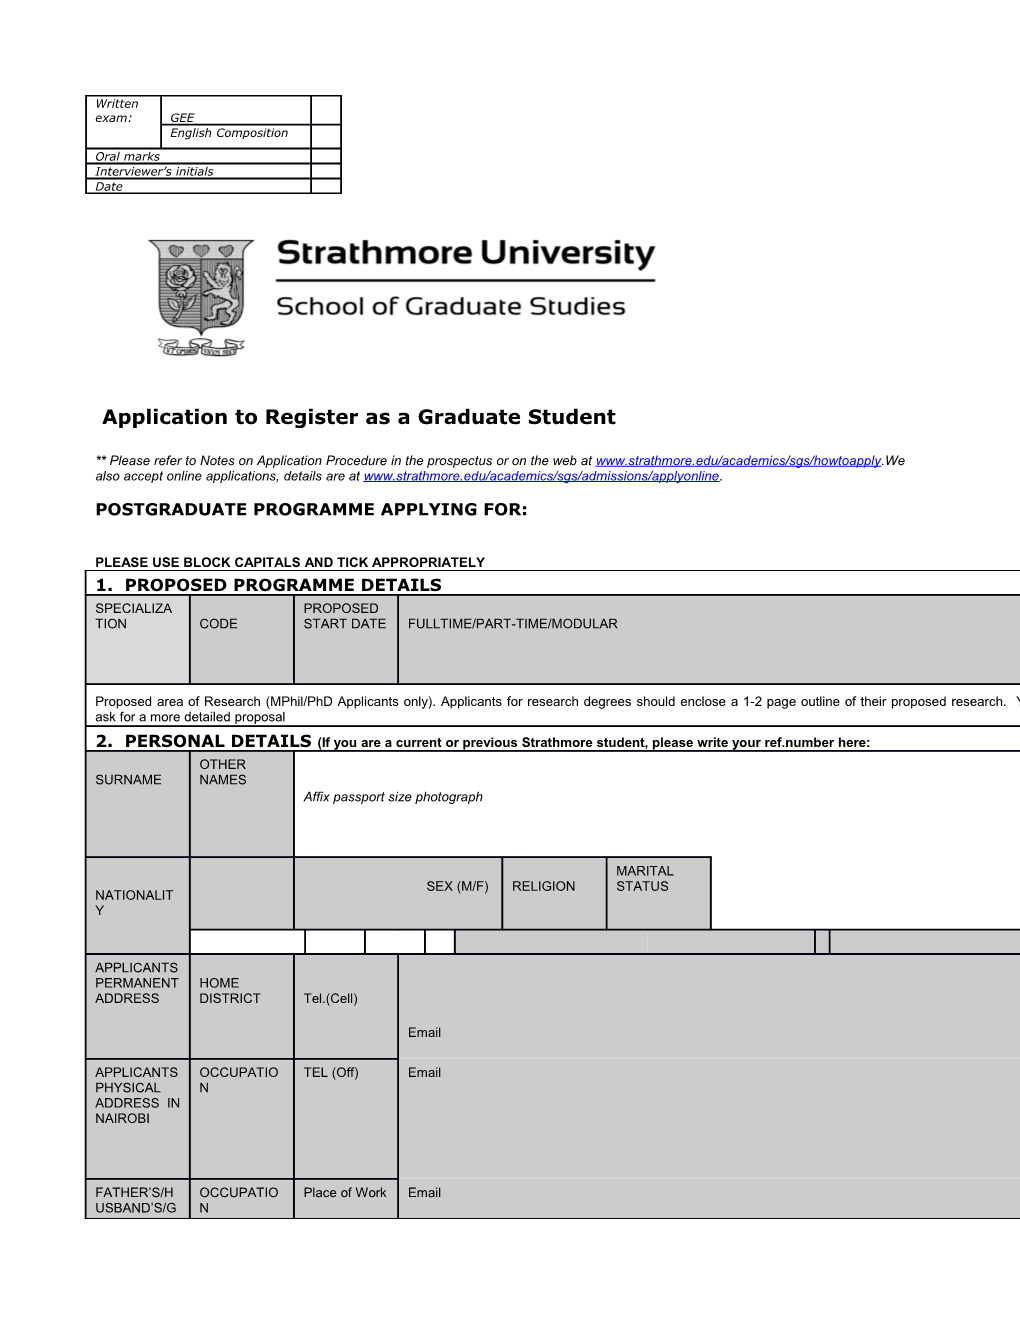 Application to Register As a Graduate Student